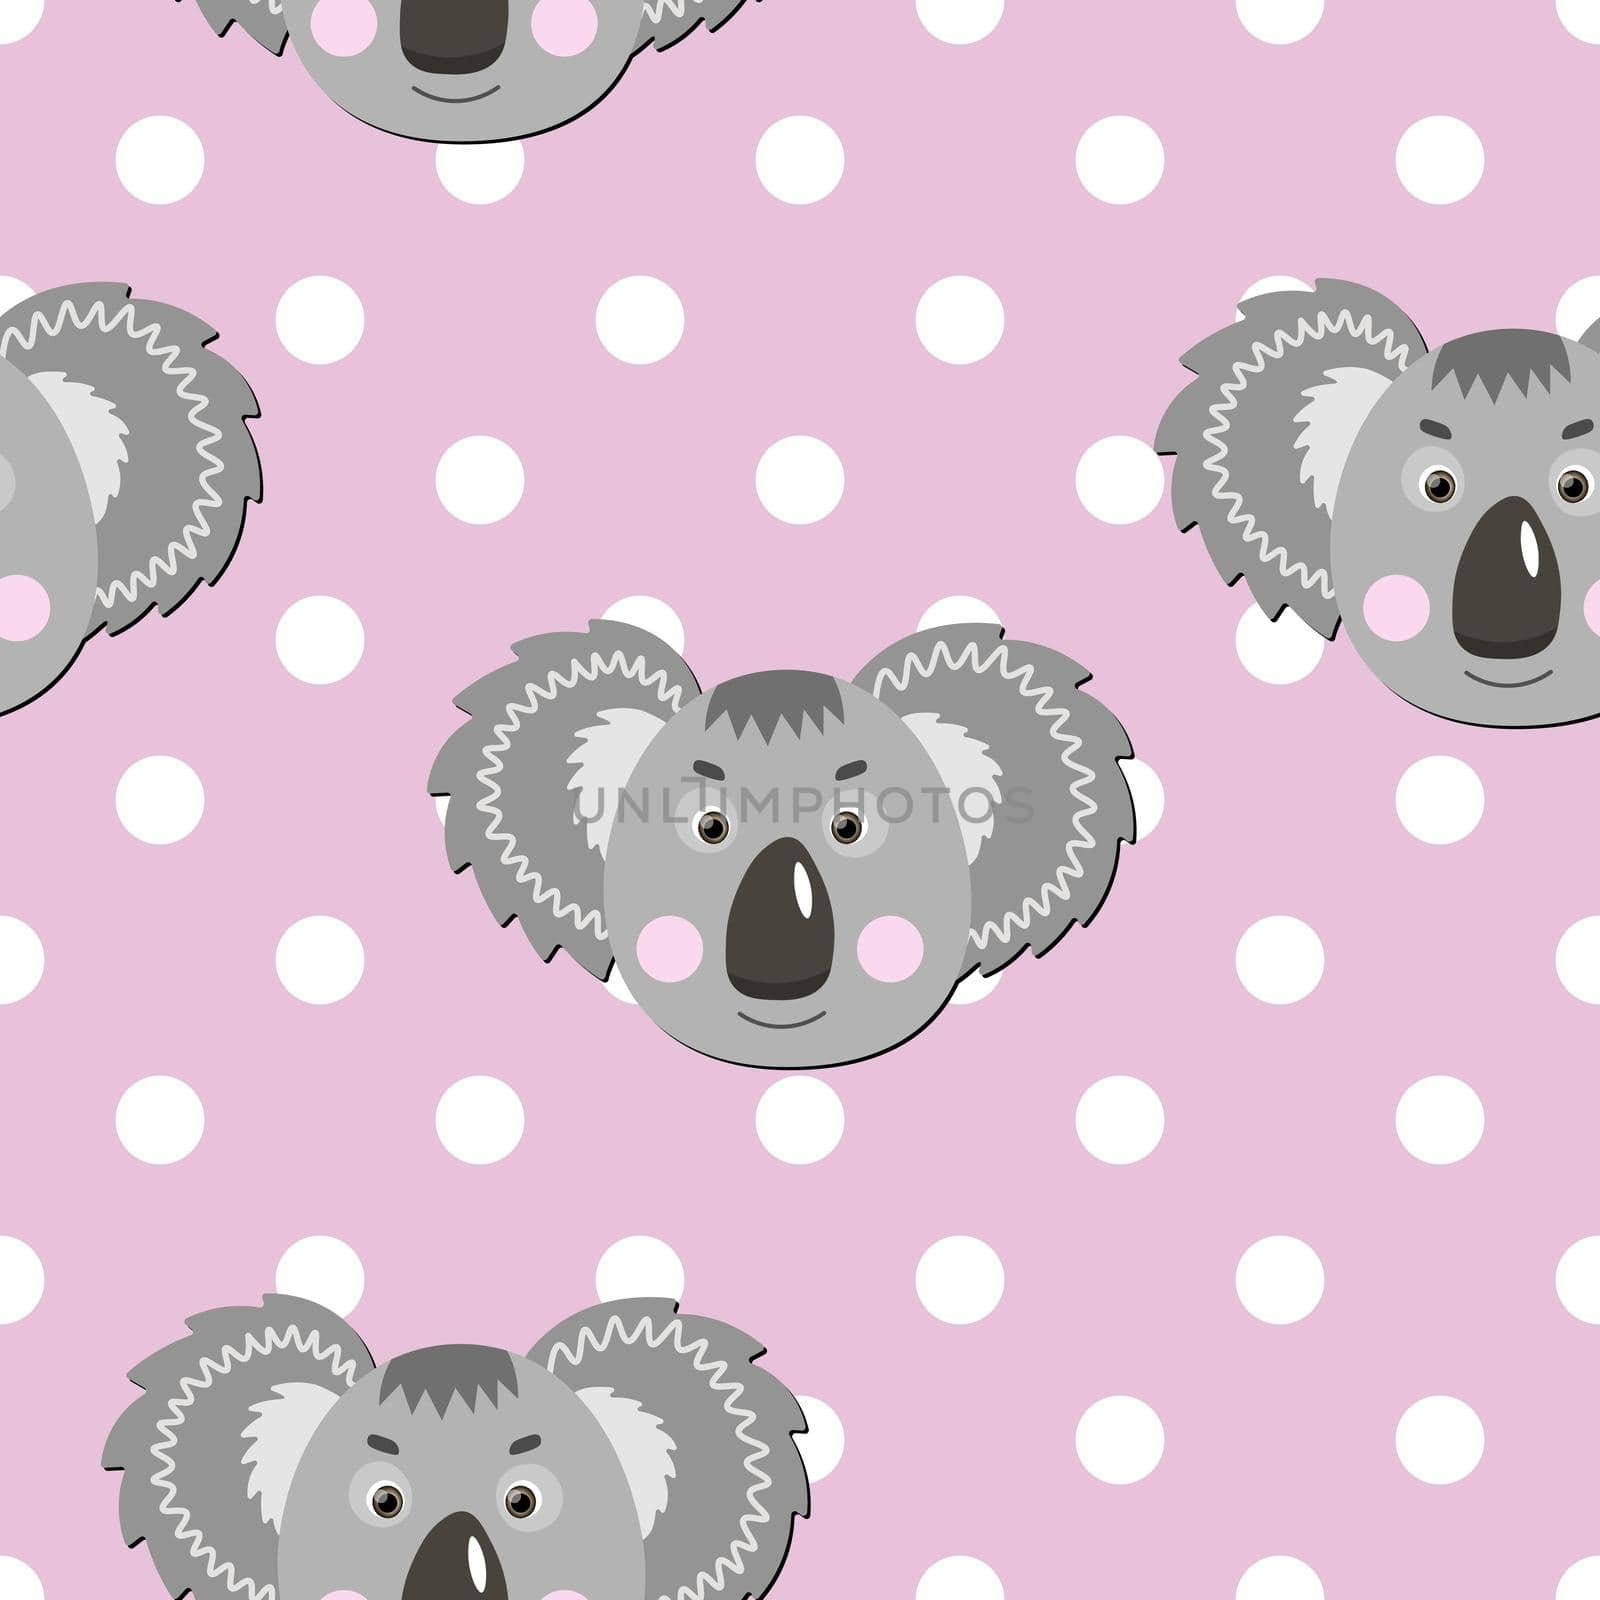 Vector flat animals colorful illustration for kids. Seamless pattern with cute koala face on pink polka dots background. Adorable cartoon character. Design for card, poster, fabric, textile.